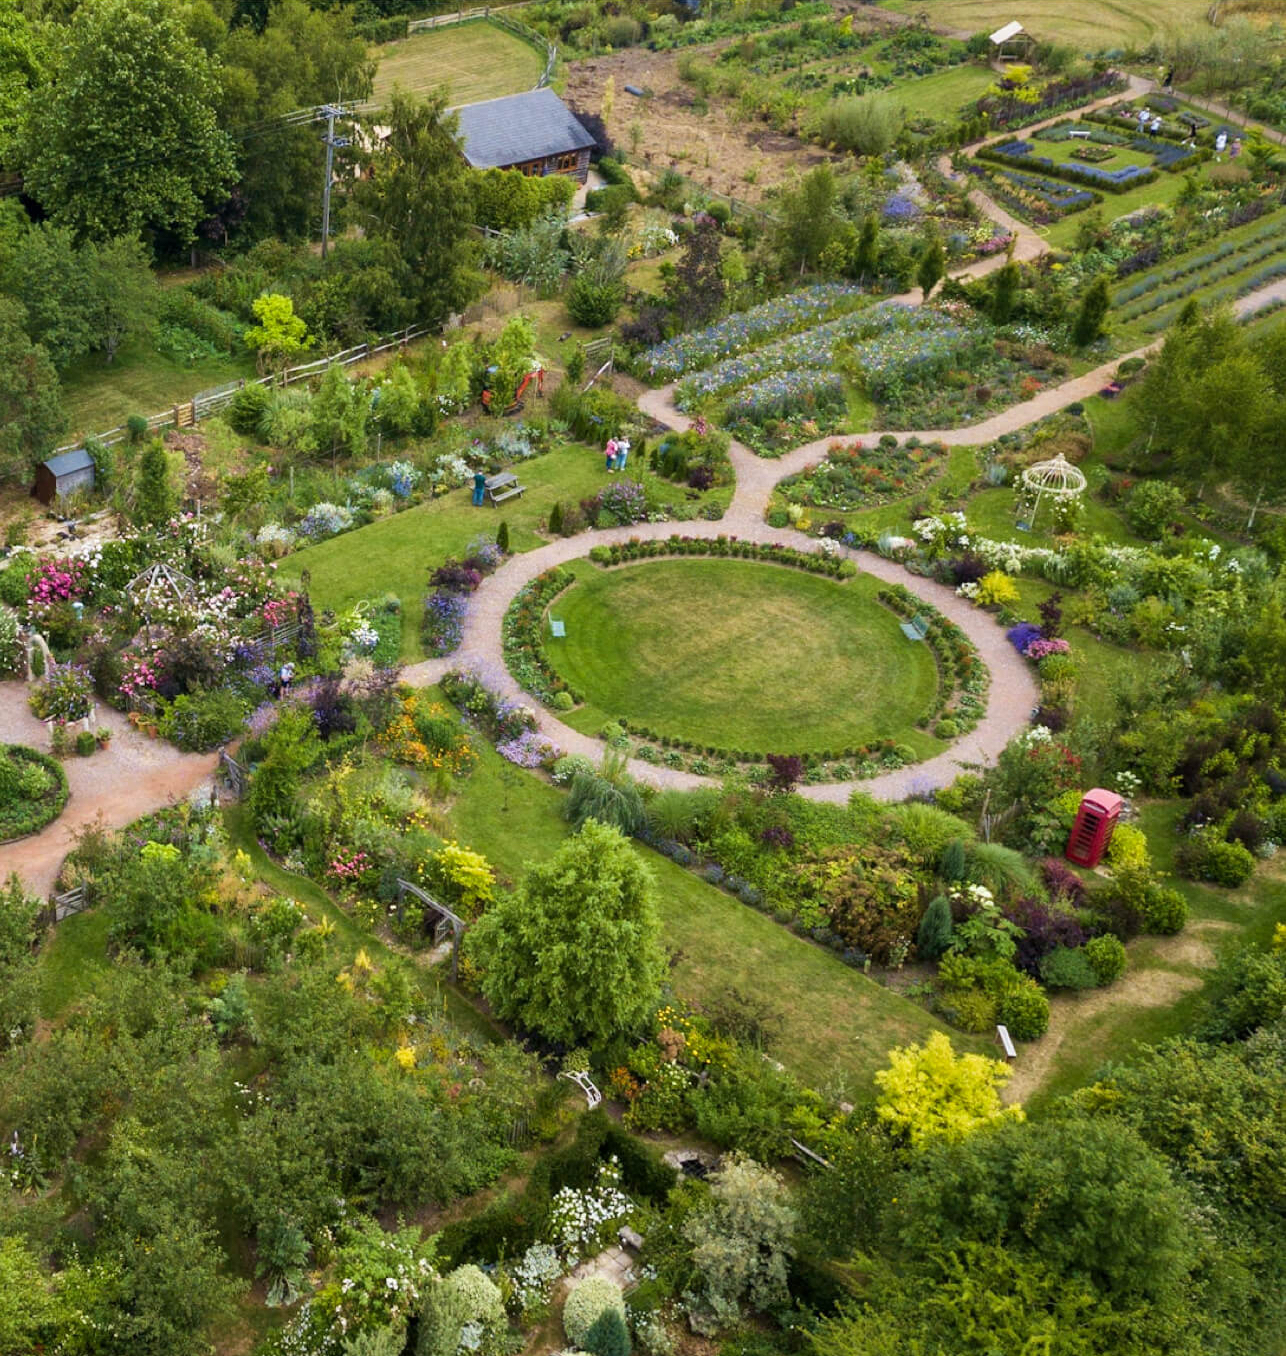 Arial view of The Cottage Gardens lavender gardens.